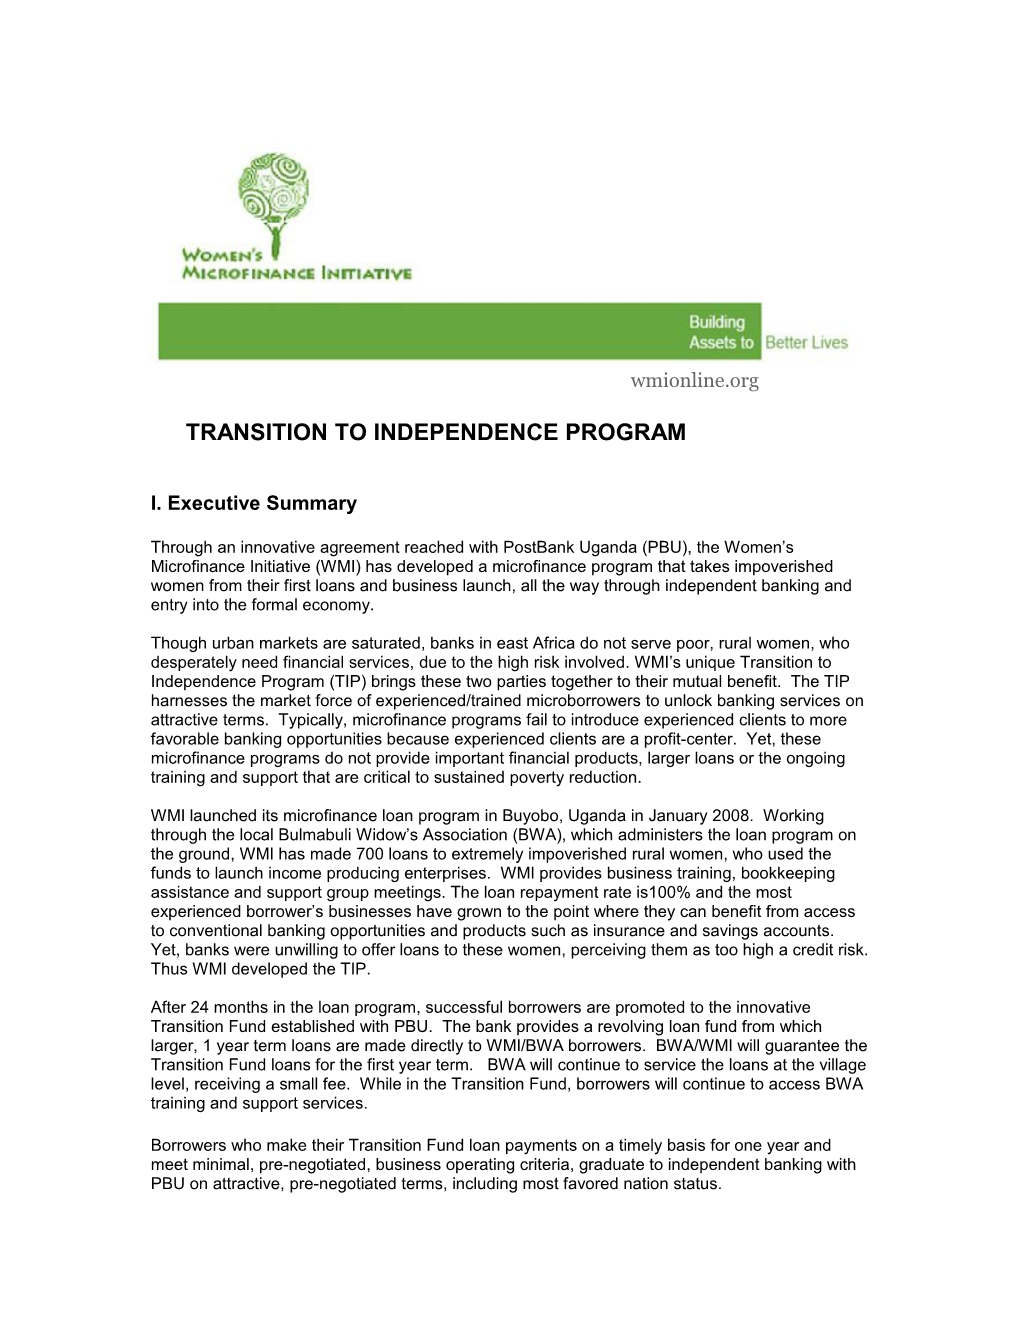 Transition to Independence Program